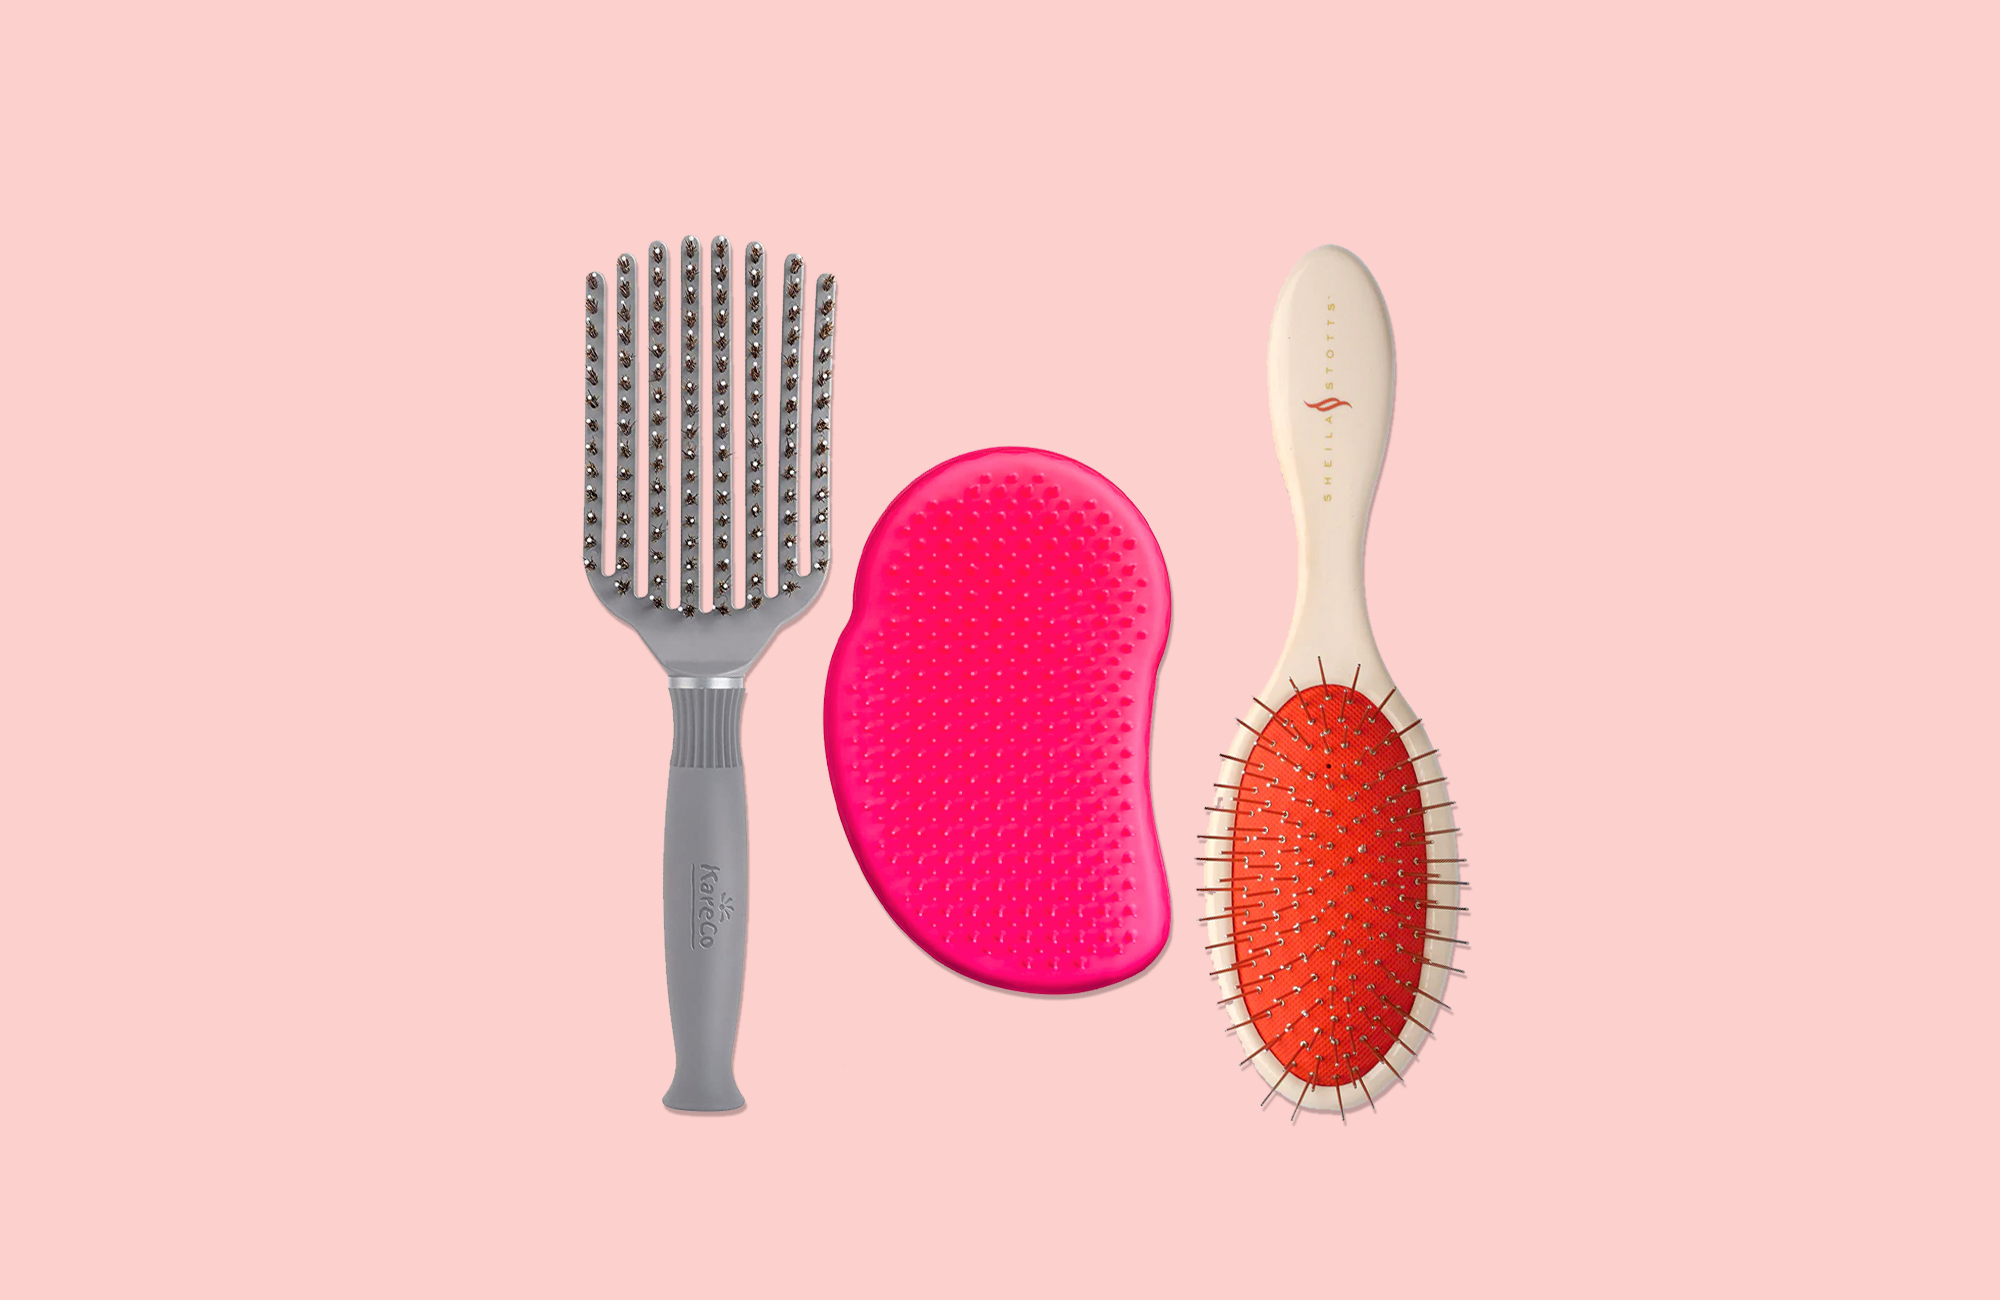 Best Hair Combs & Brushes for Grooming On-the-Go